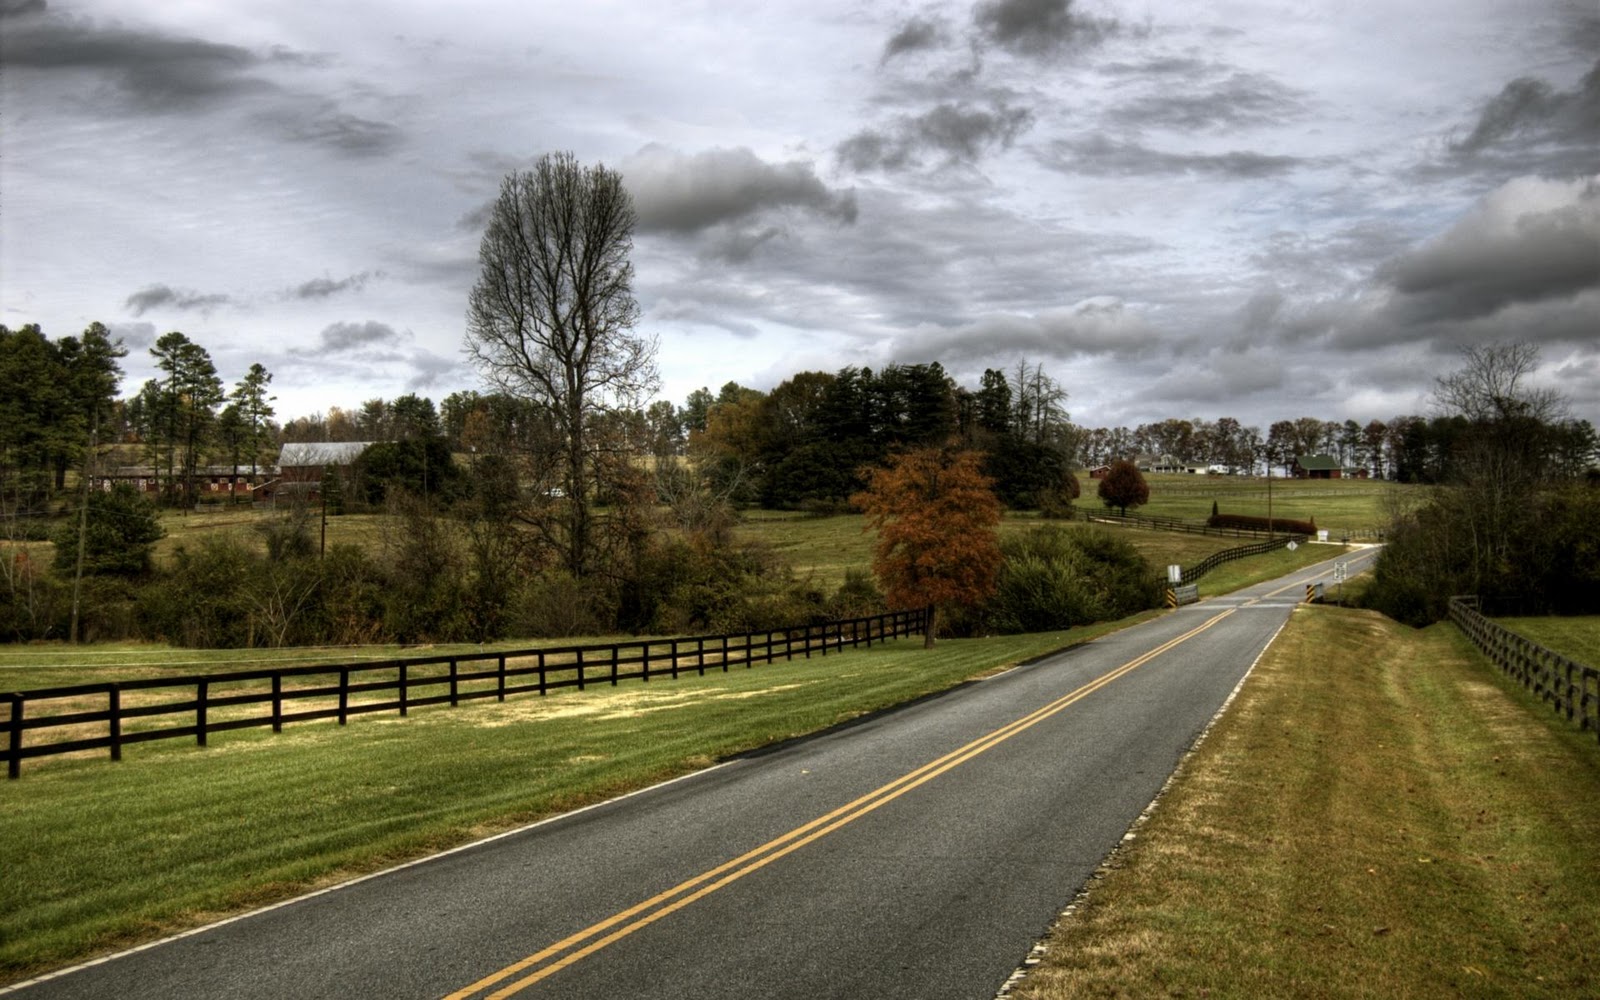 Farm road images background free download